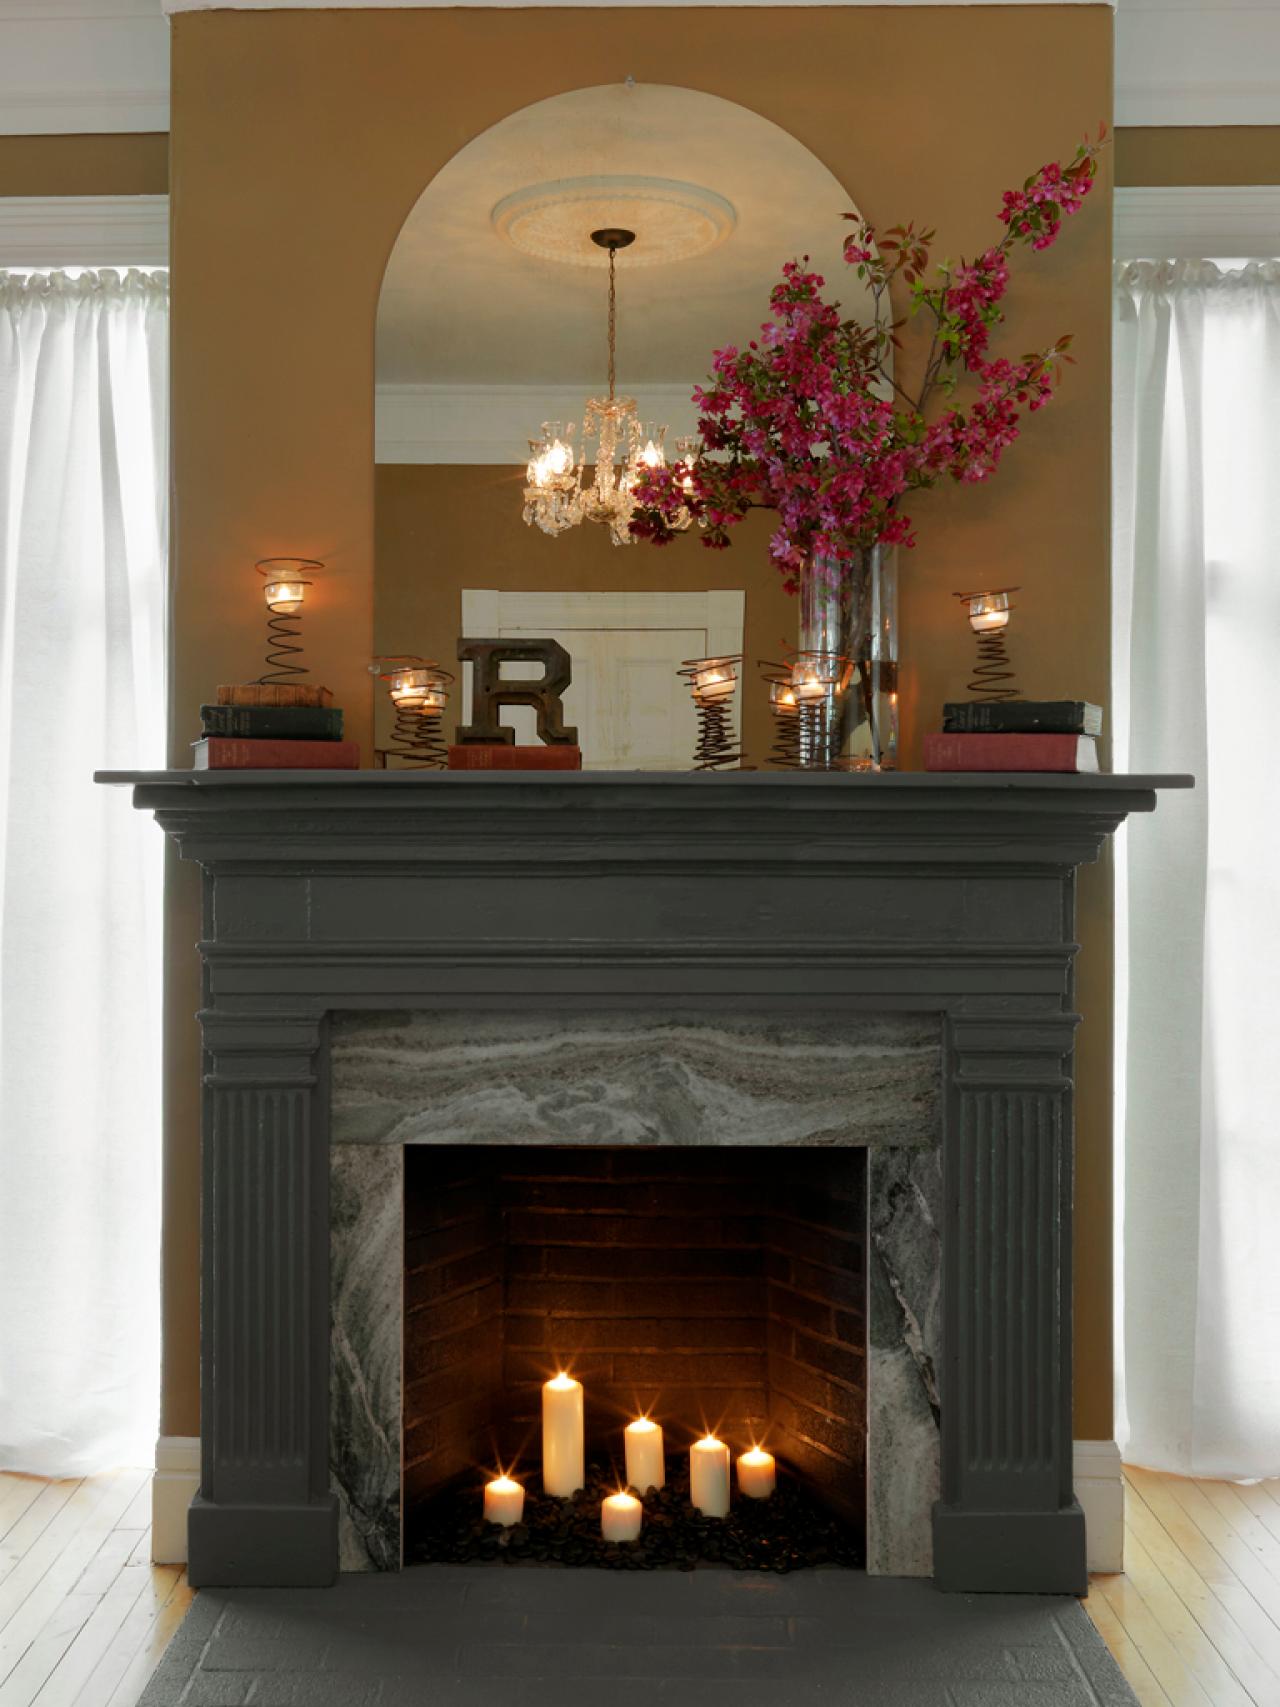 Fireplace Surround And Make A Mantel, How To Remove A Wood Fire Surround